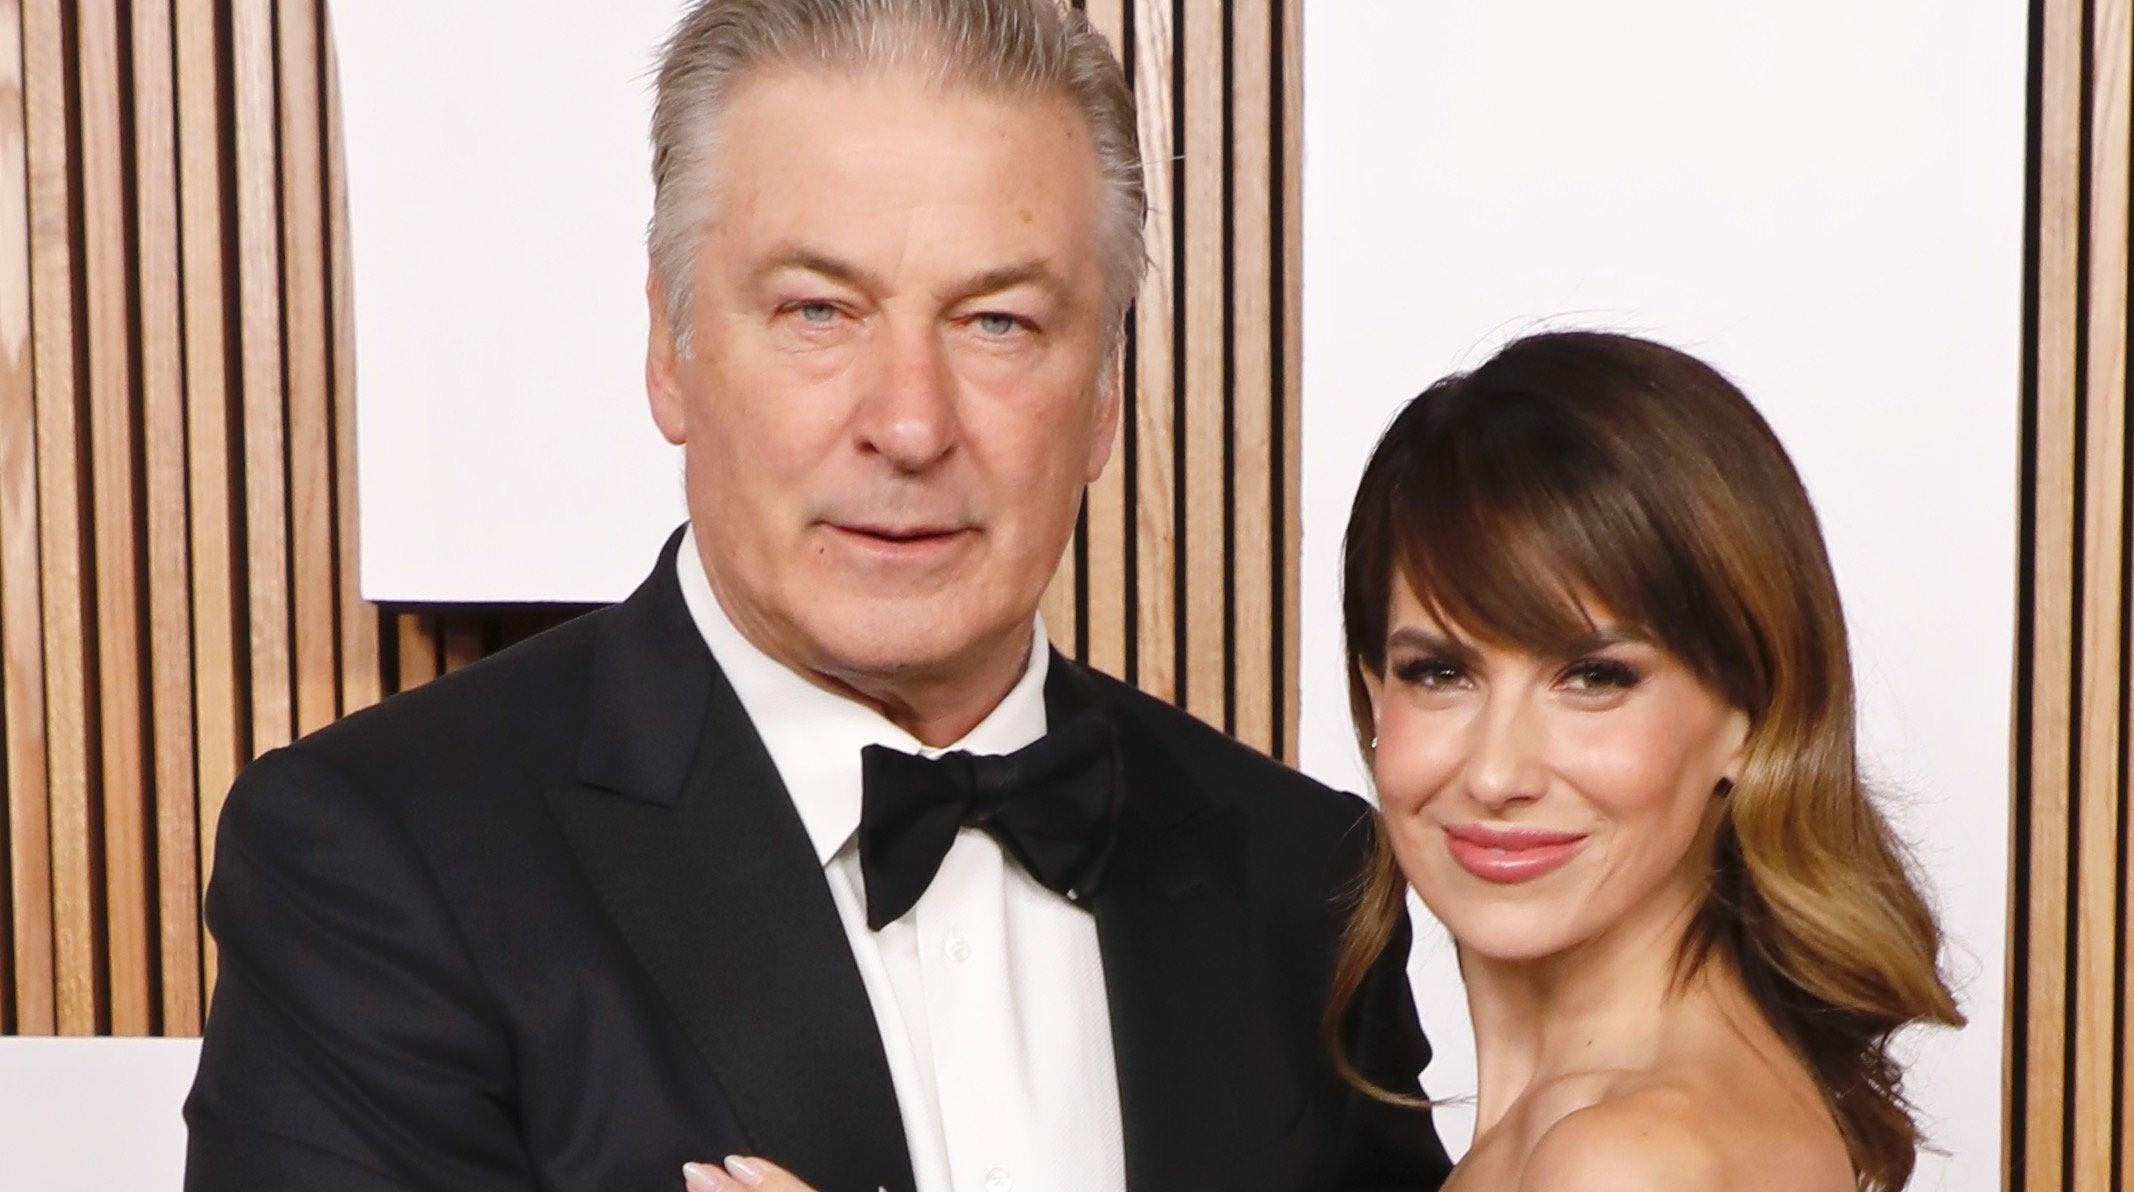 The Alec Baldwin family reality TV series is coming whether you like it or not